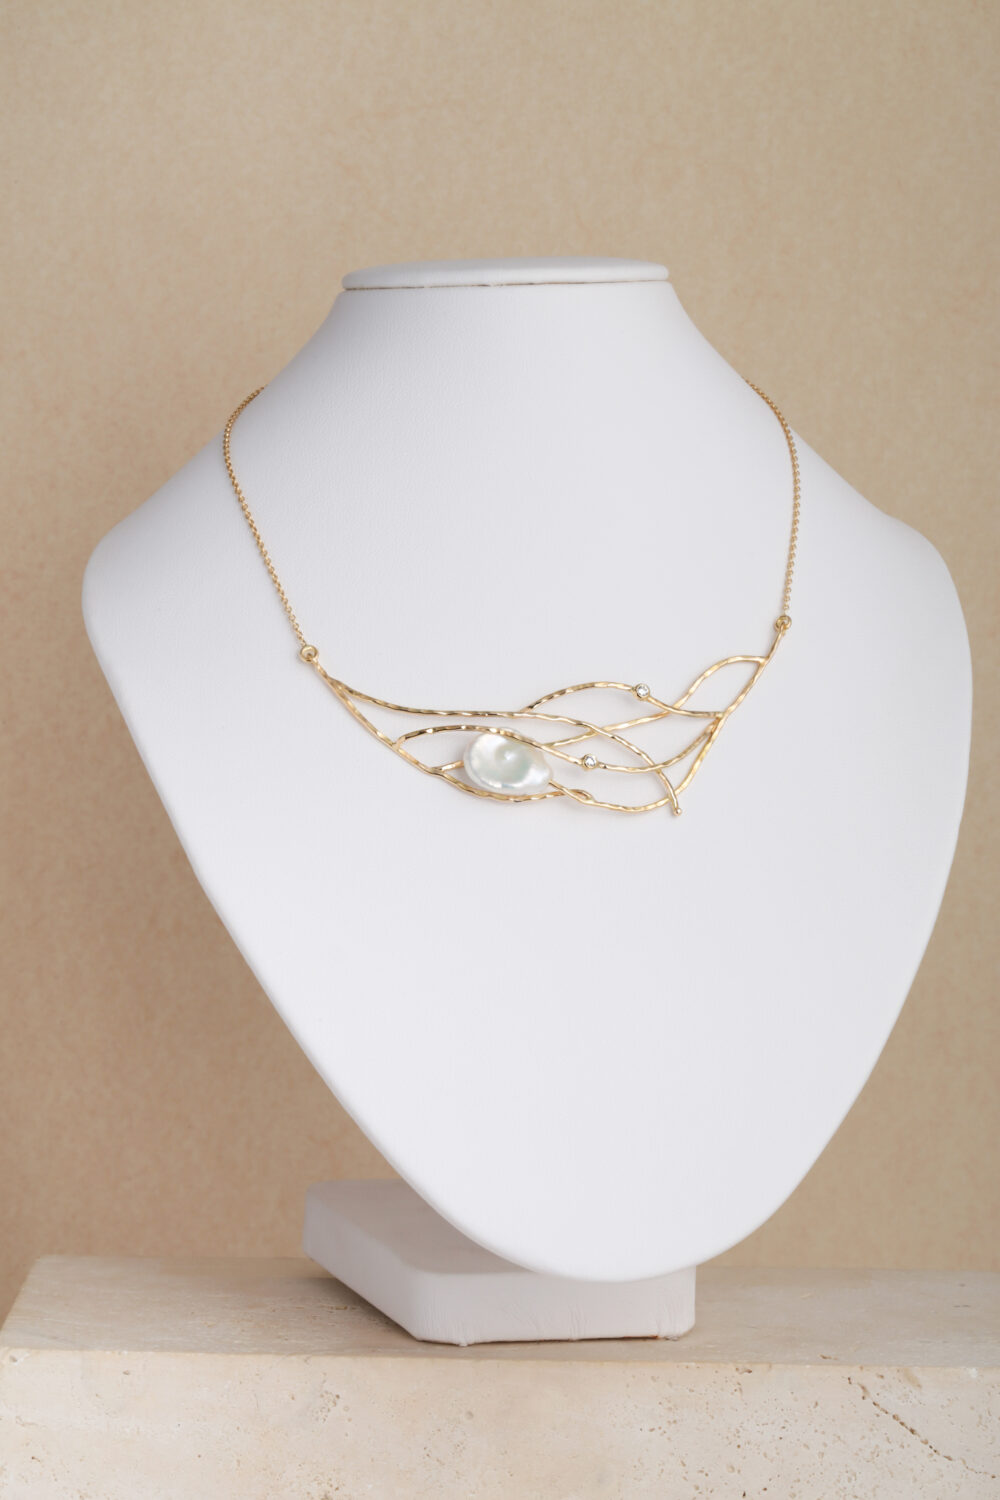 Diamonds and pearl necklace crafted from 18-karat gold set with two brilliant cut diamonds and a baroque pearl.